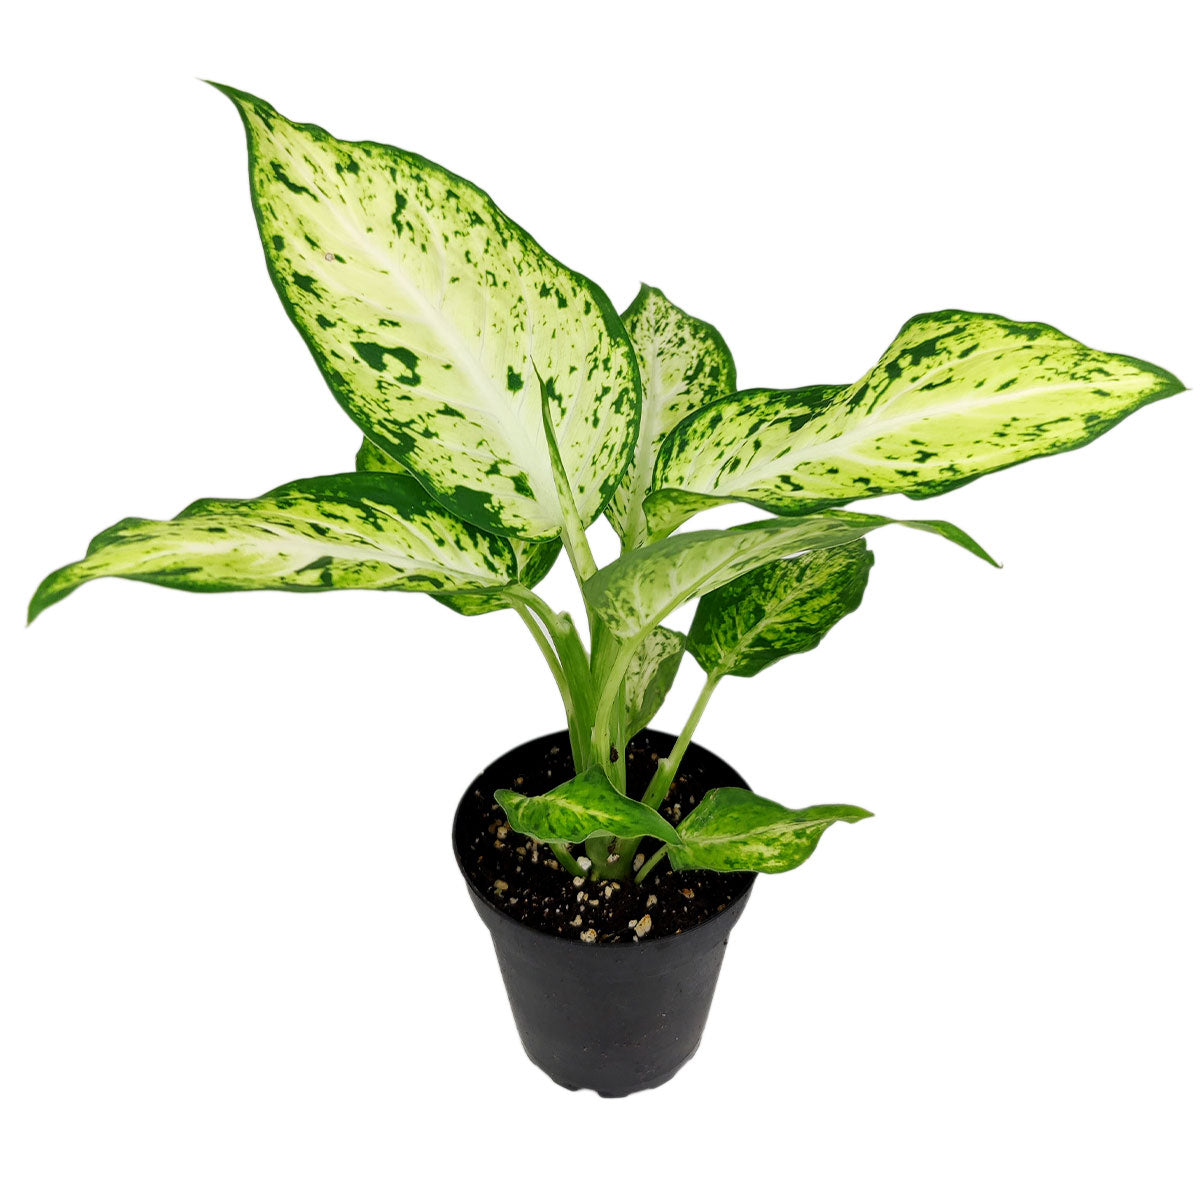 Dieffenbachia Amy, Dumb Cane Amy, how to care for Dieffenbachia Amy, easy to care for houseplants, houseplants with huge foliage, plant gift ideas